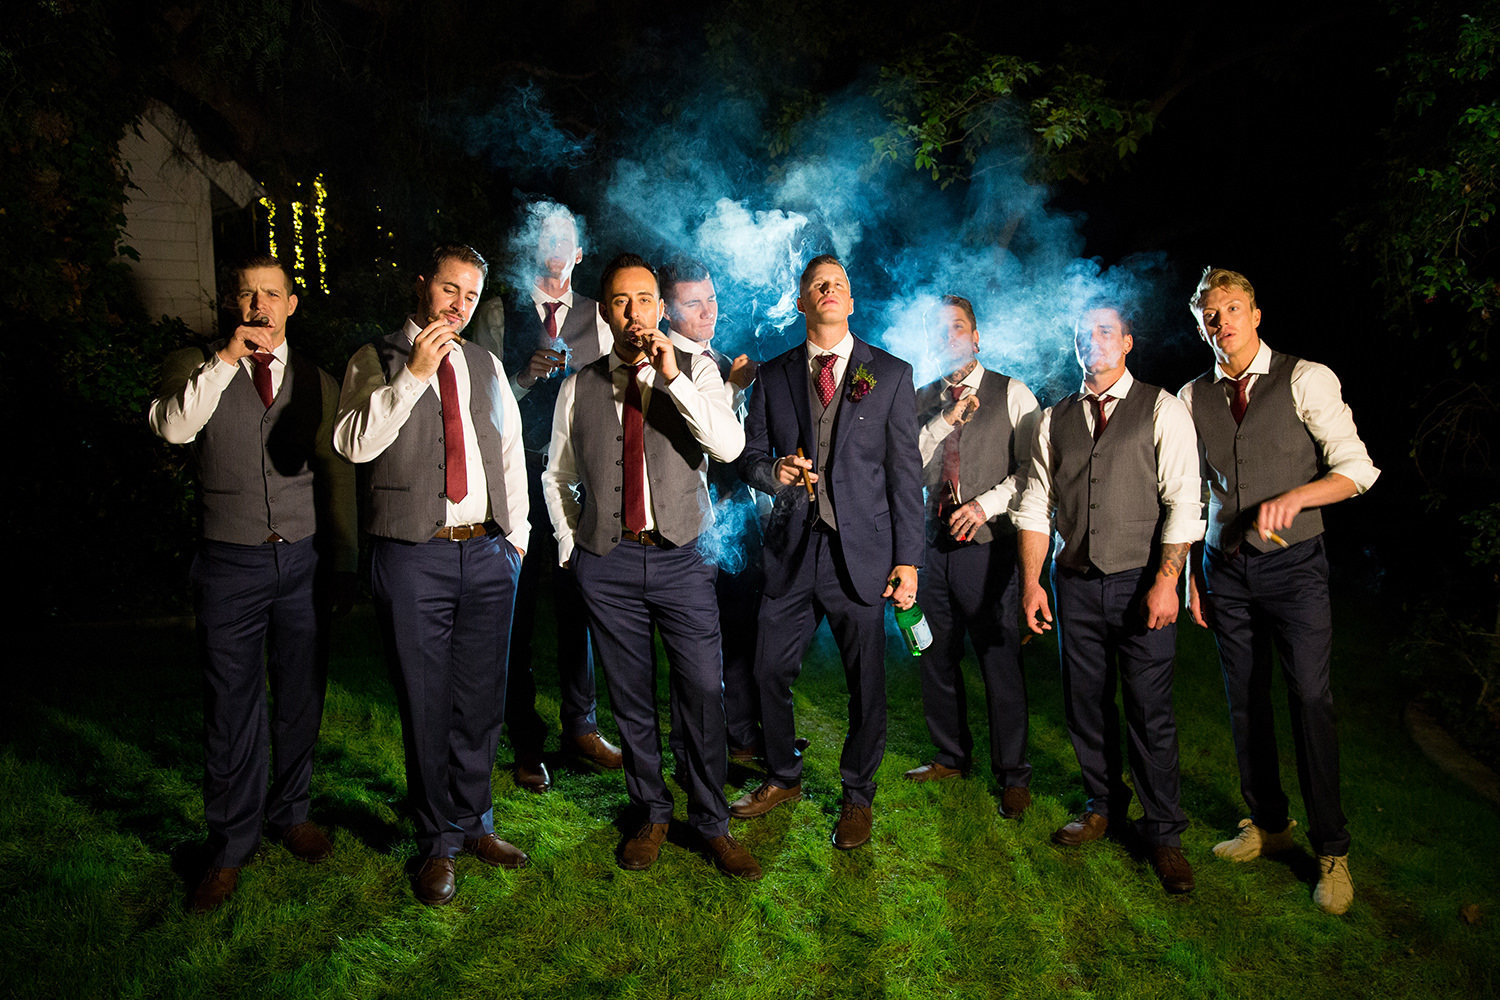 Male model groomsmen portrait with cigars at night